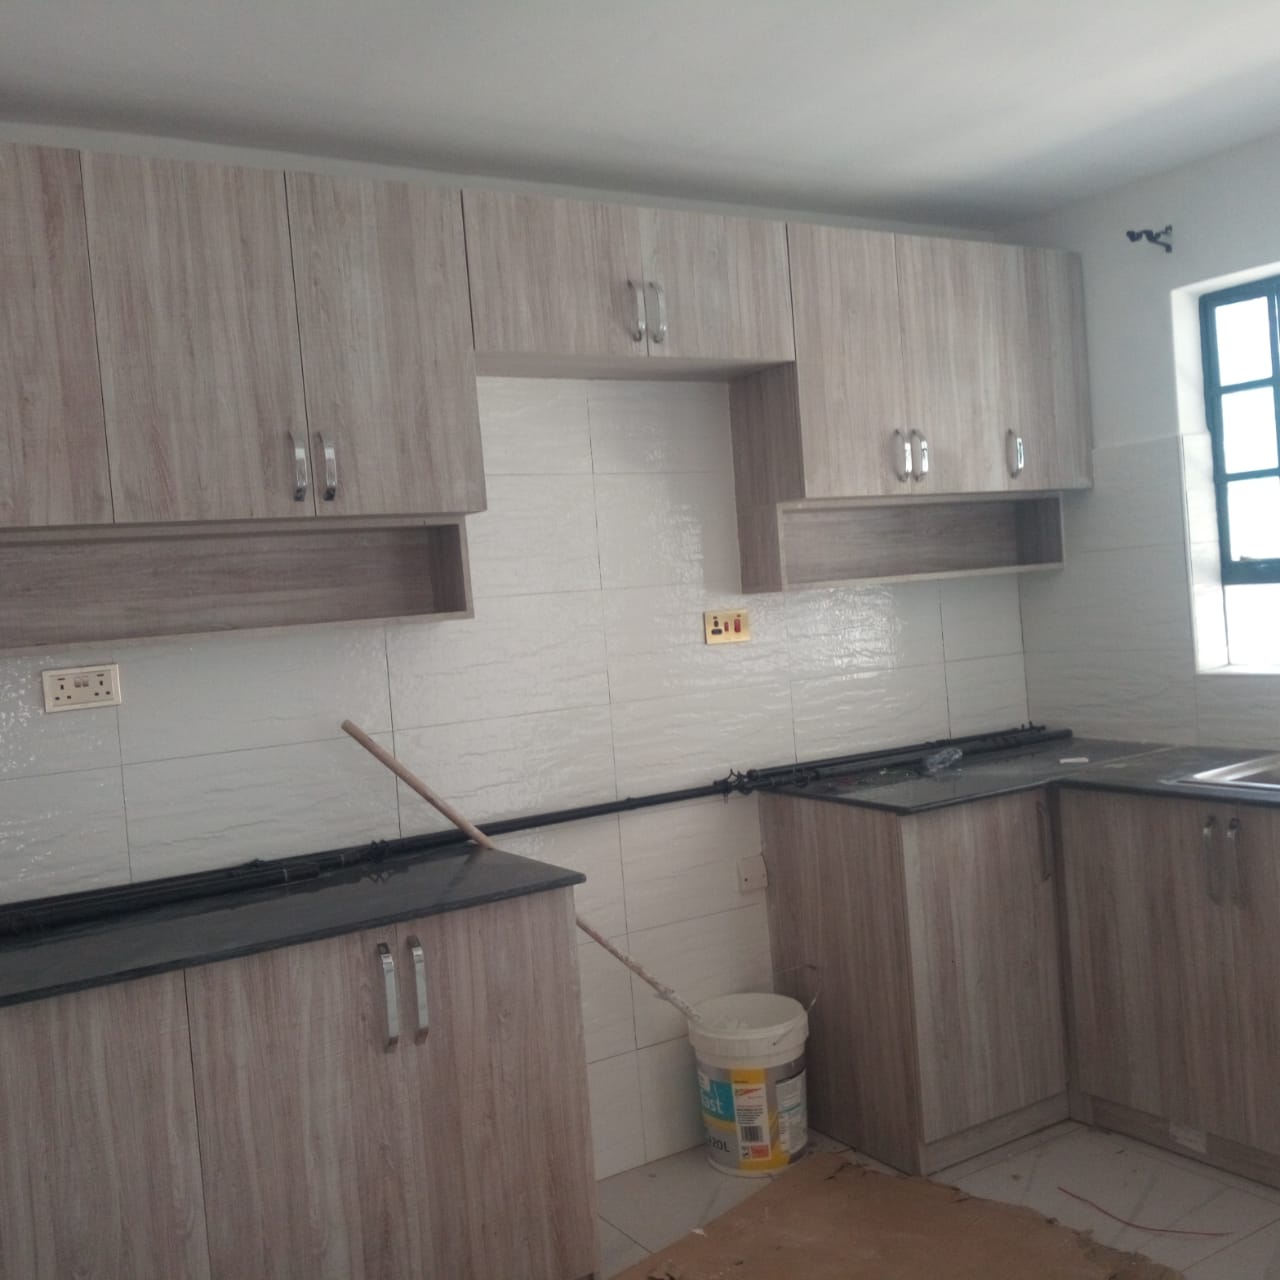 3 bedrooms and semi Detached Dsq for Sale in Kiambu road along the Northern bypass